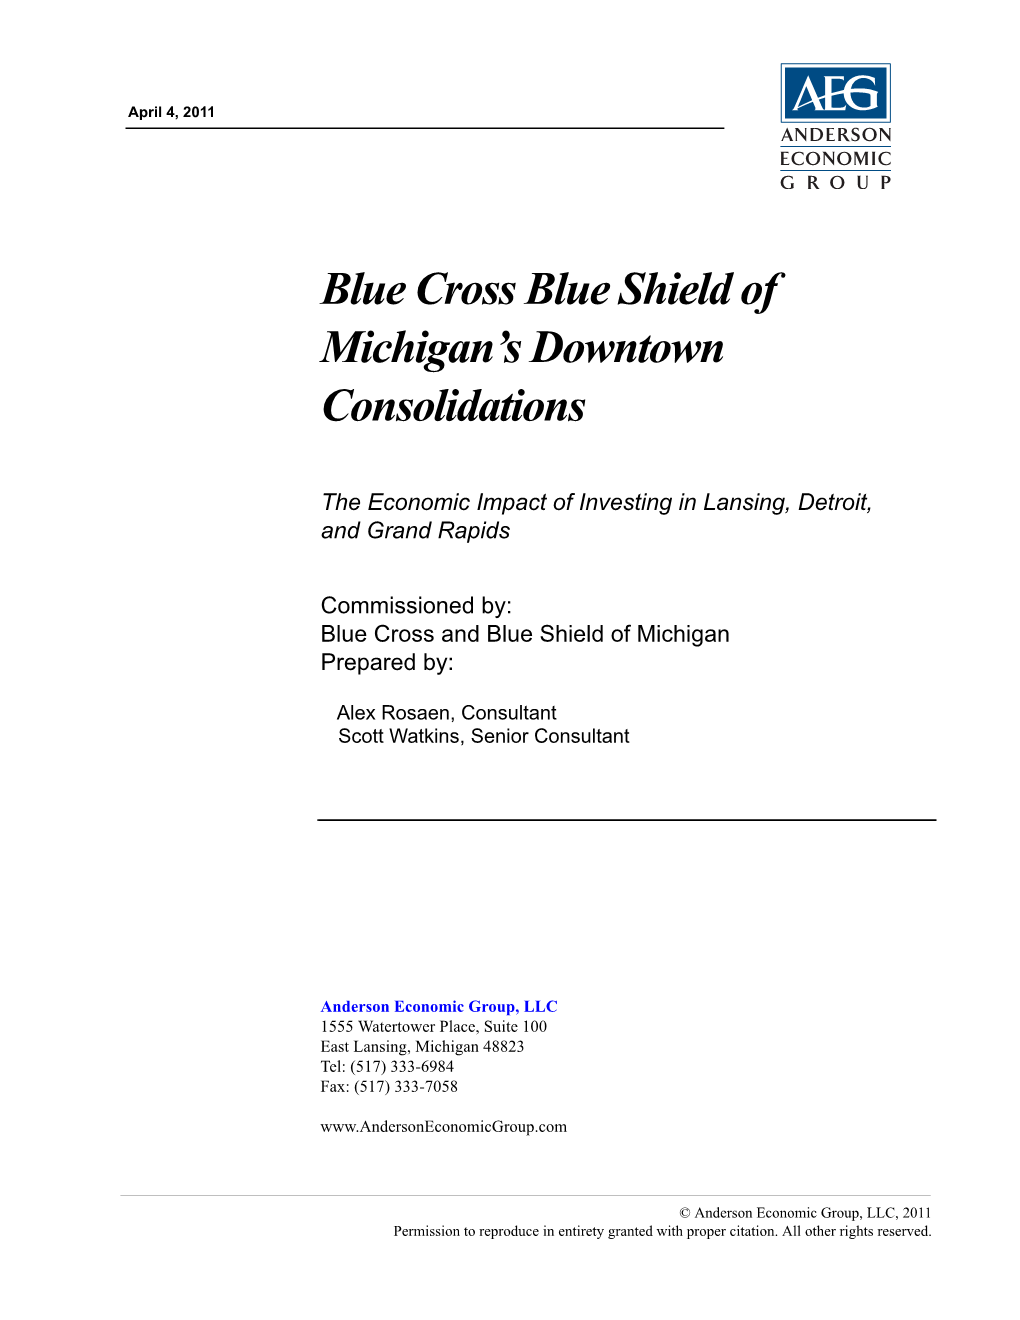 Blue Cross Blue Shield of Michigan's Downtown Consolidations